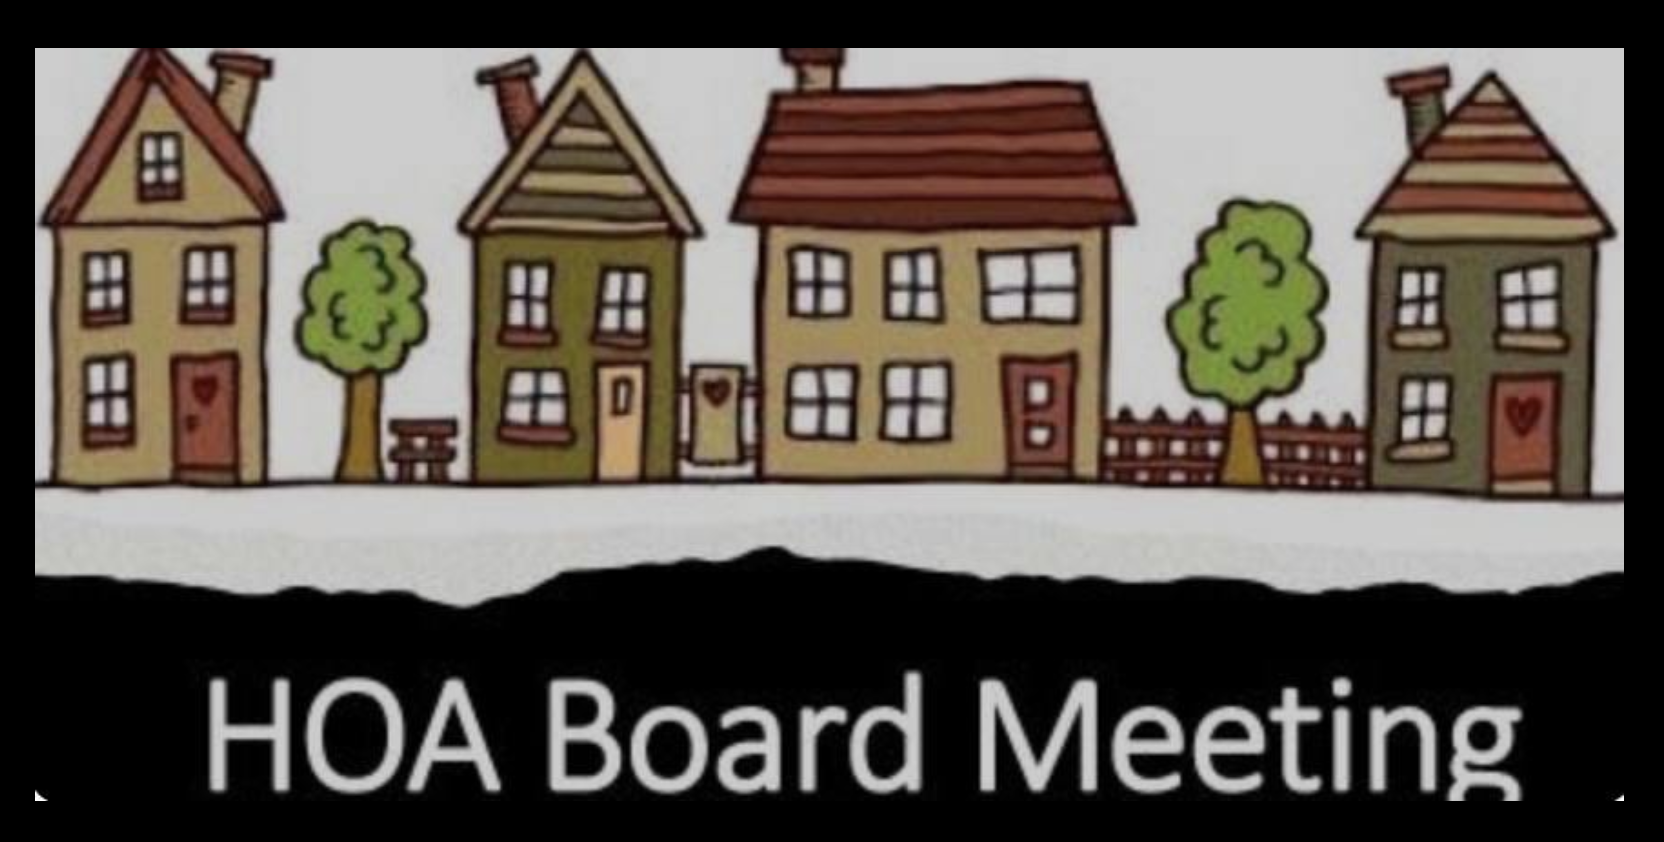 Pinebrook Homeowners Association Board Meeting Scheduled for April 24th at 7pm.